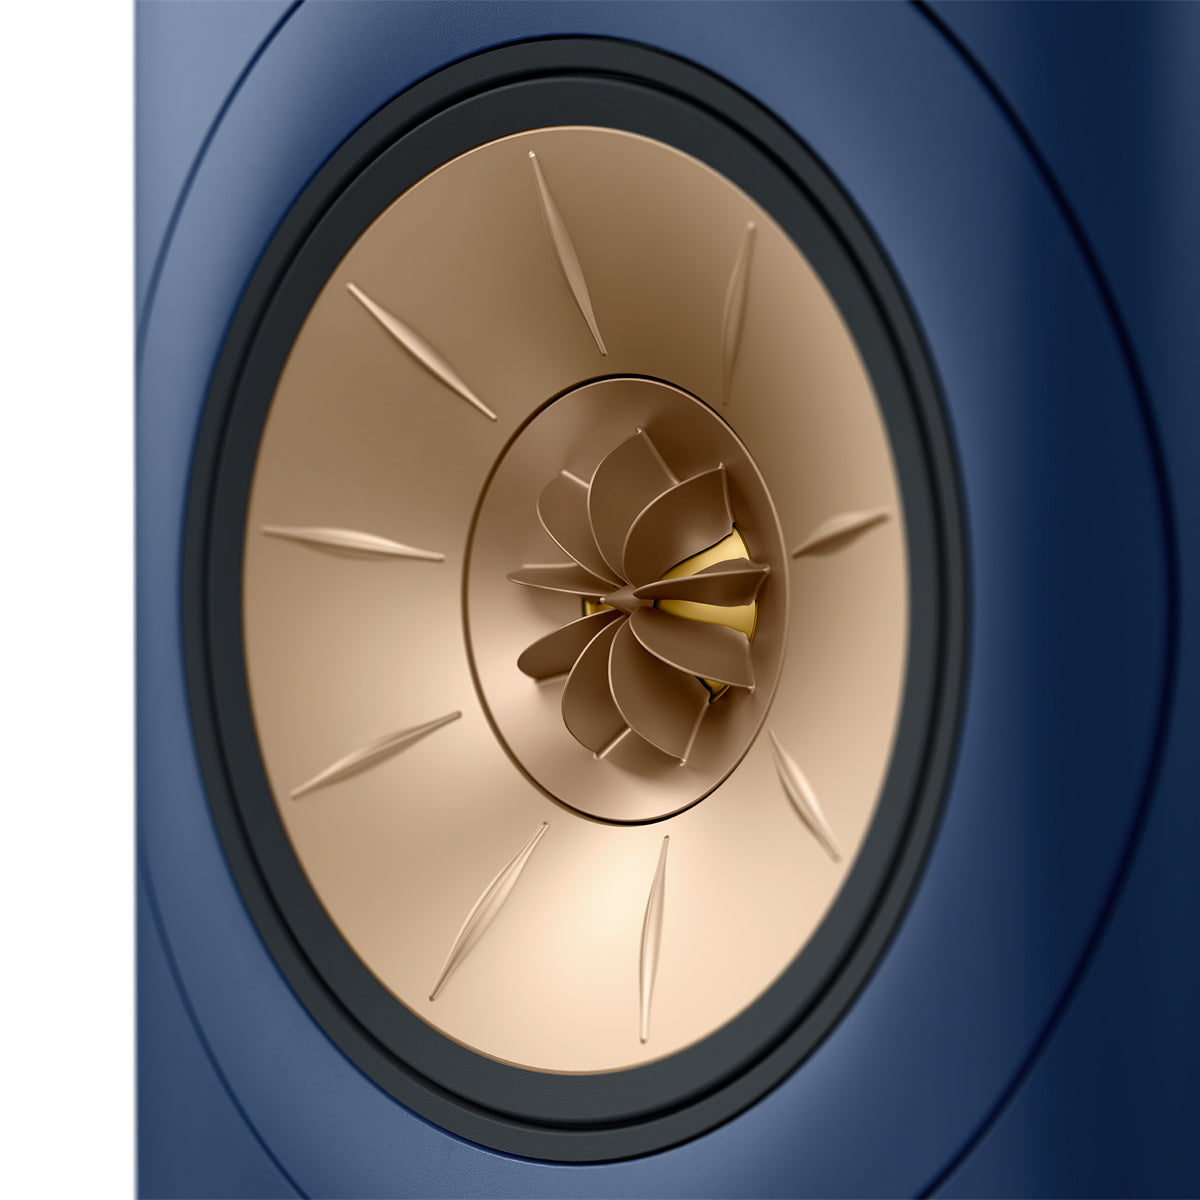 KEF LS60 Wireless HiFi Speakers - Royal Blue - The Audio Experts